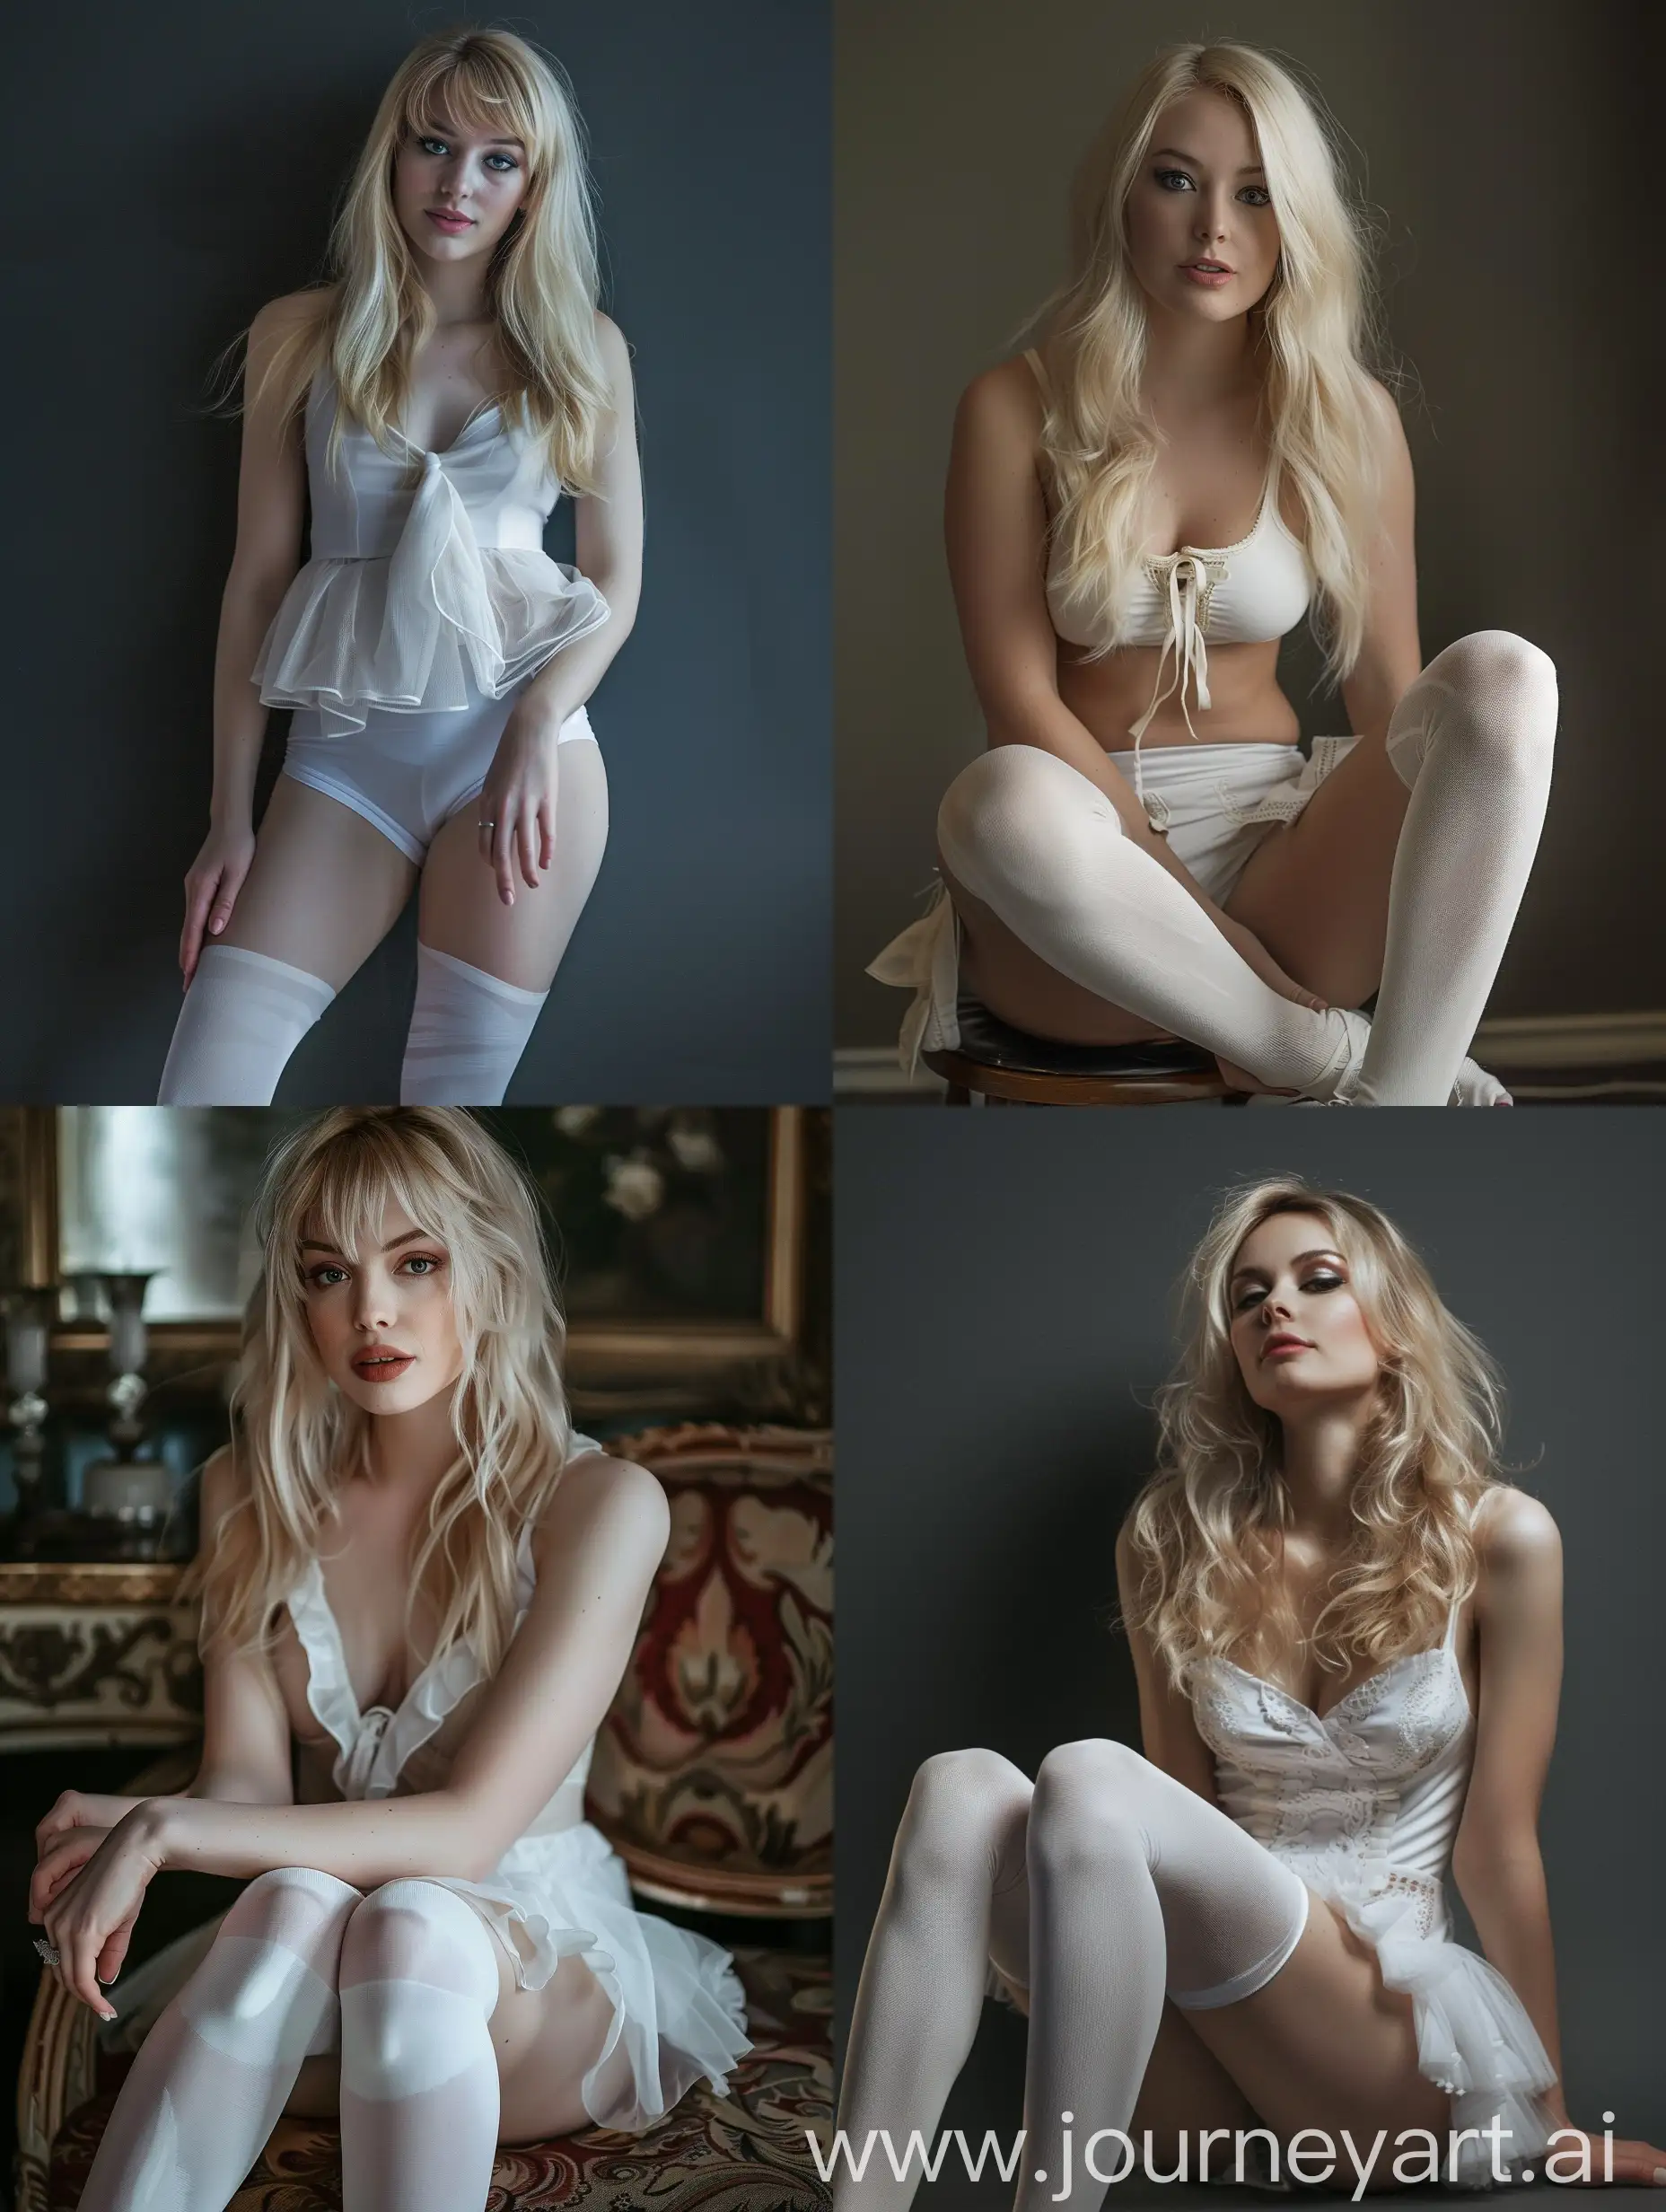 A beautiful blonde woman in white tights